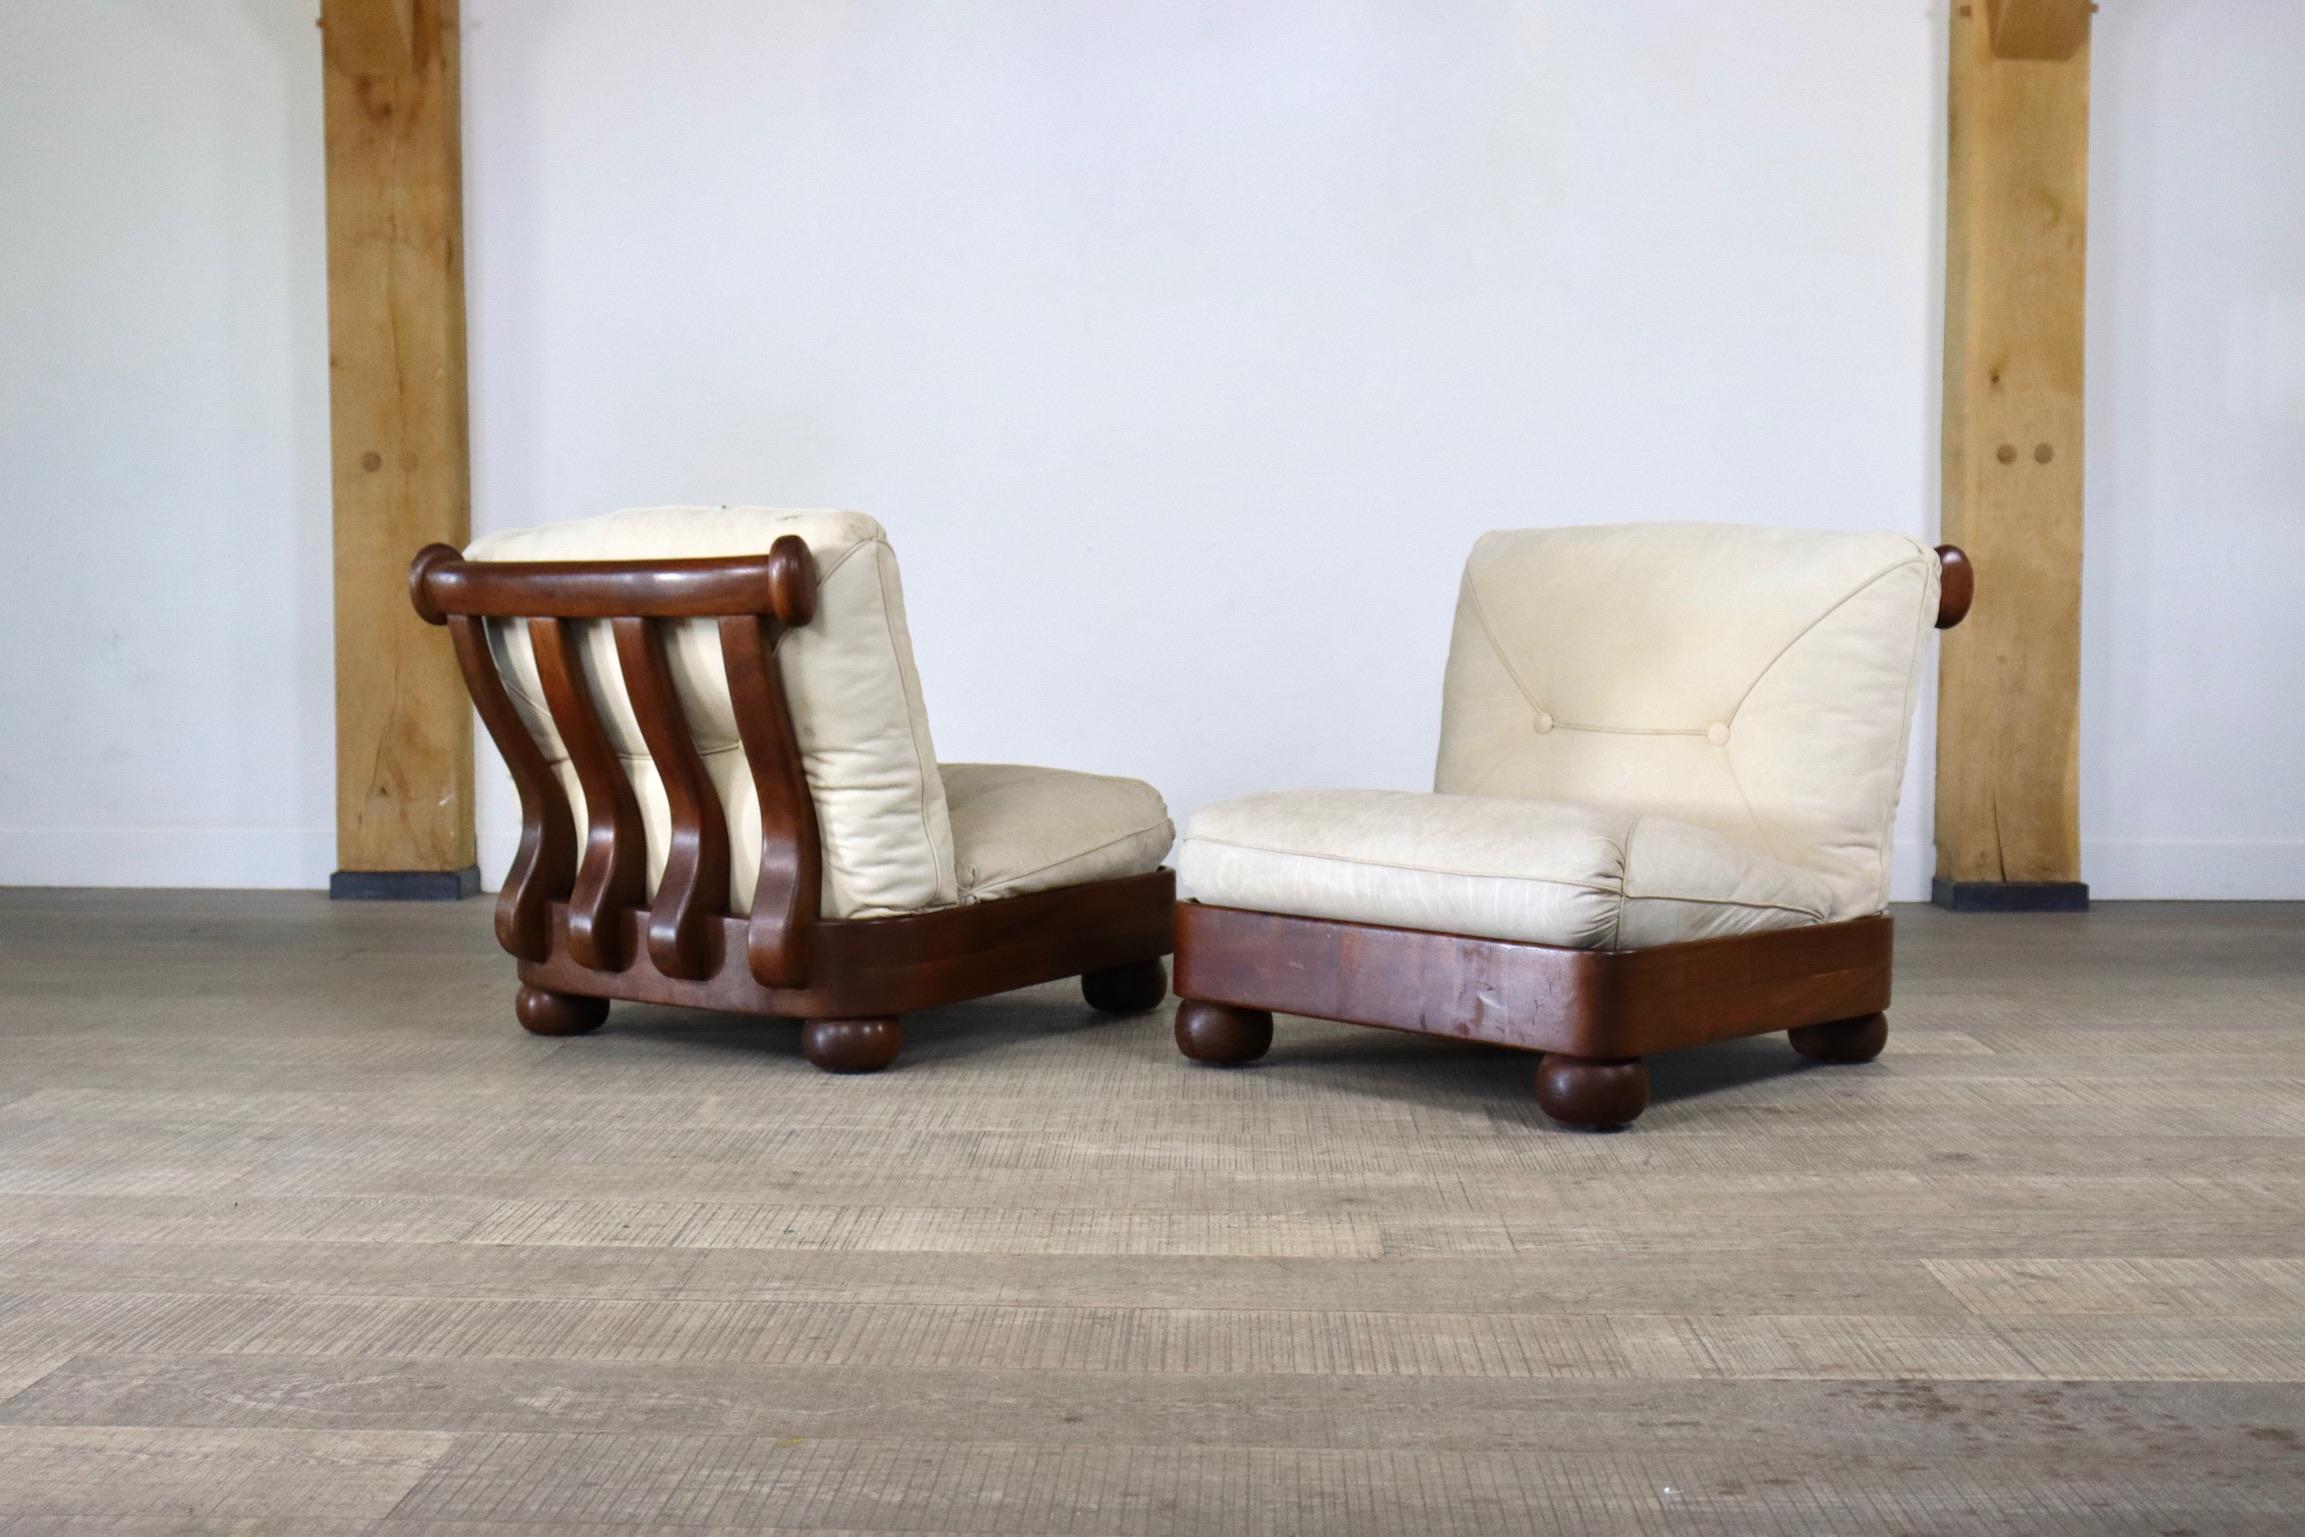 Incredible pair of sculptural lounge chairs from Italy 1960s. The stunning solid wooden frame is supported by thick round legs that have built in wheels. This way it is very easy to move them around. Complementing the frame are two chunky cream